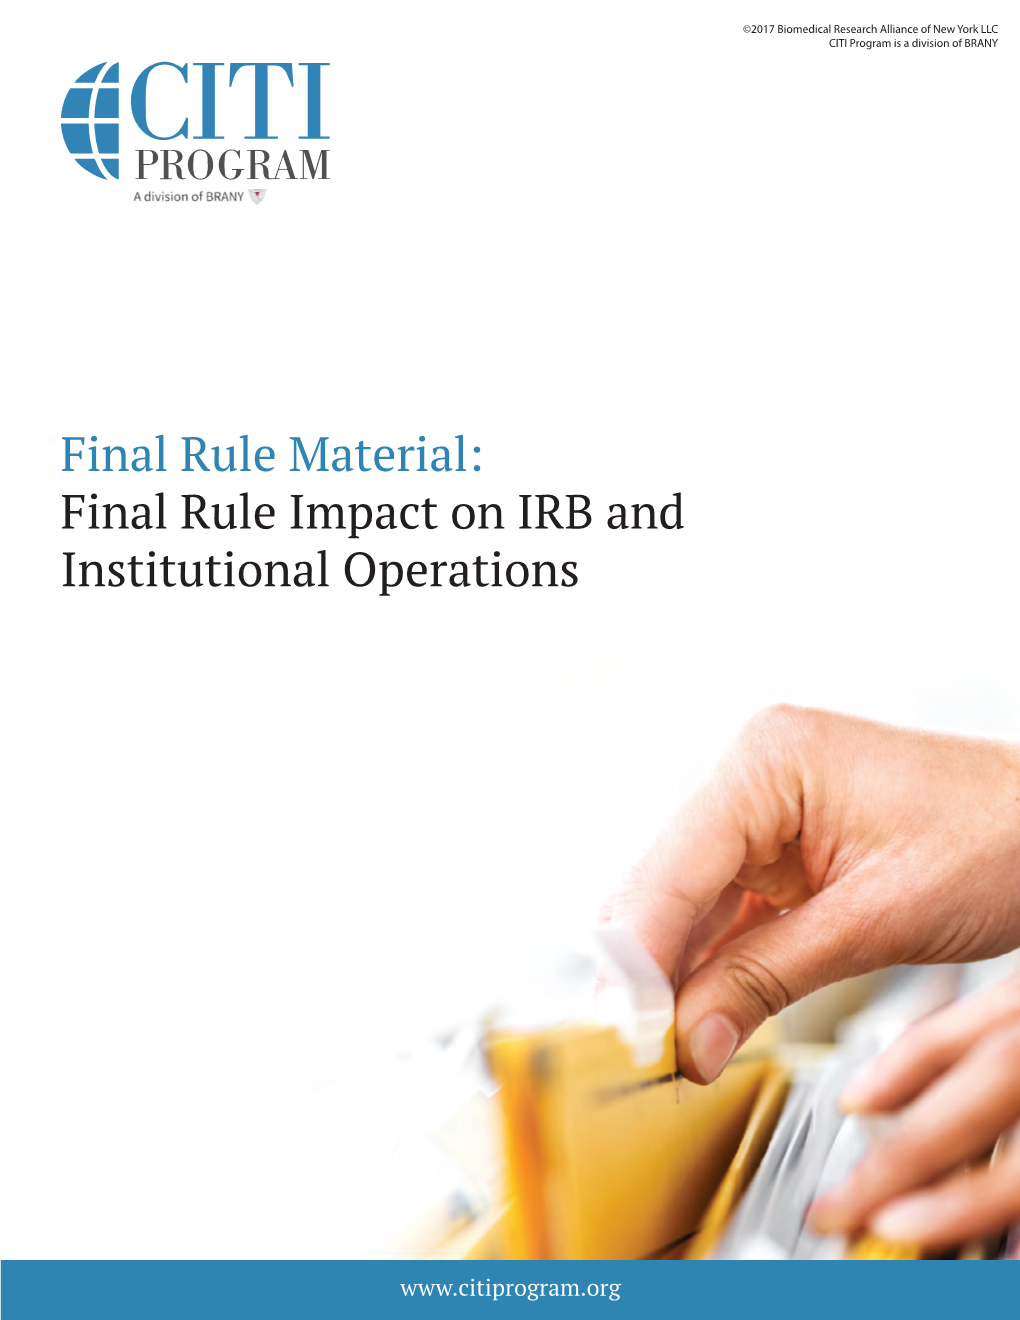 Final Rule Impact on IRB and Institutional Operations